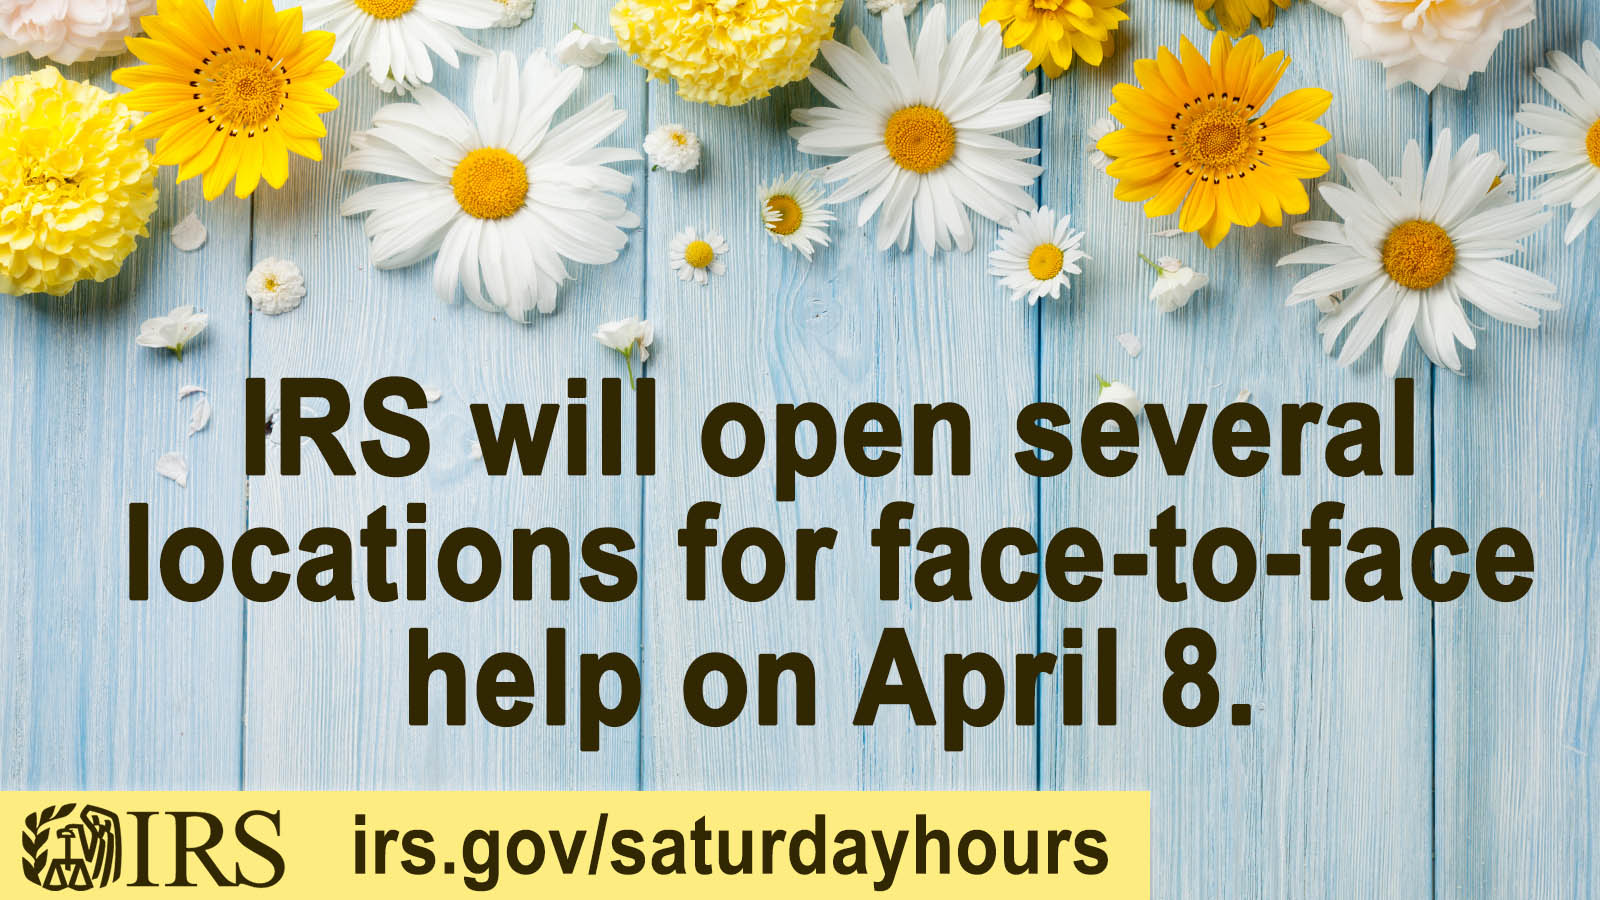 Light blue wood grain background with yellow and white spring flowers. Text: IRS will open several locations for face-to-face help on April 8. IRS logo and URL also displayed: irs.gov/saturdayhours